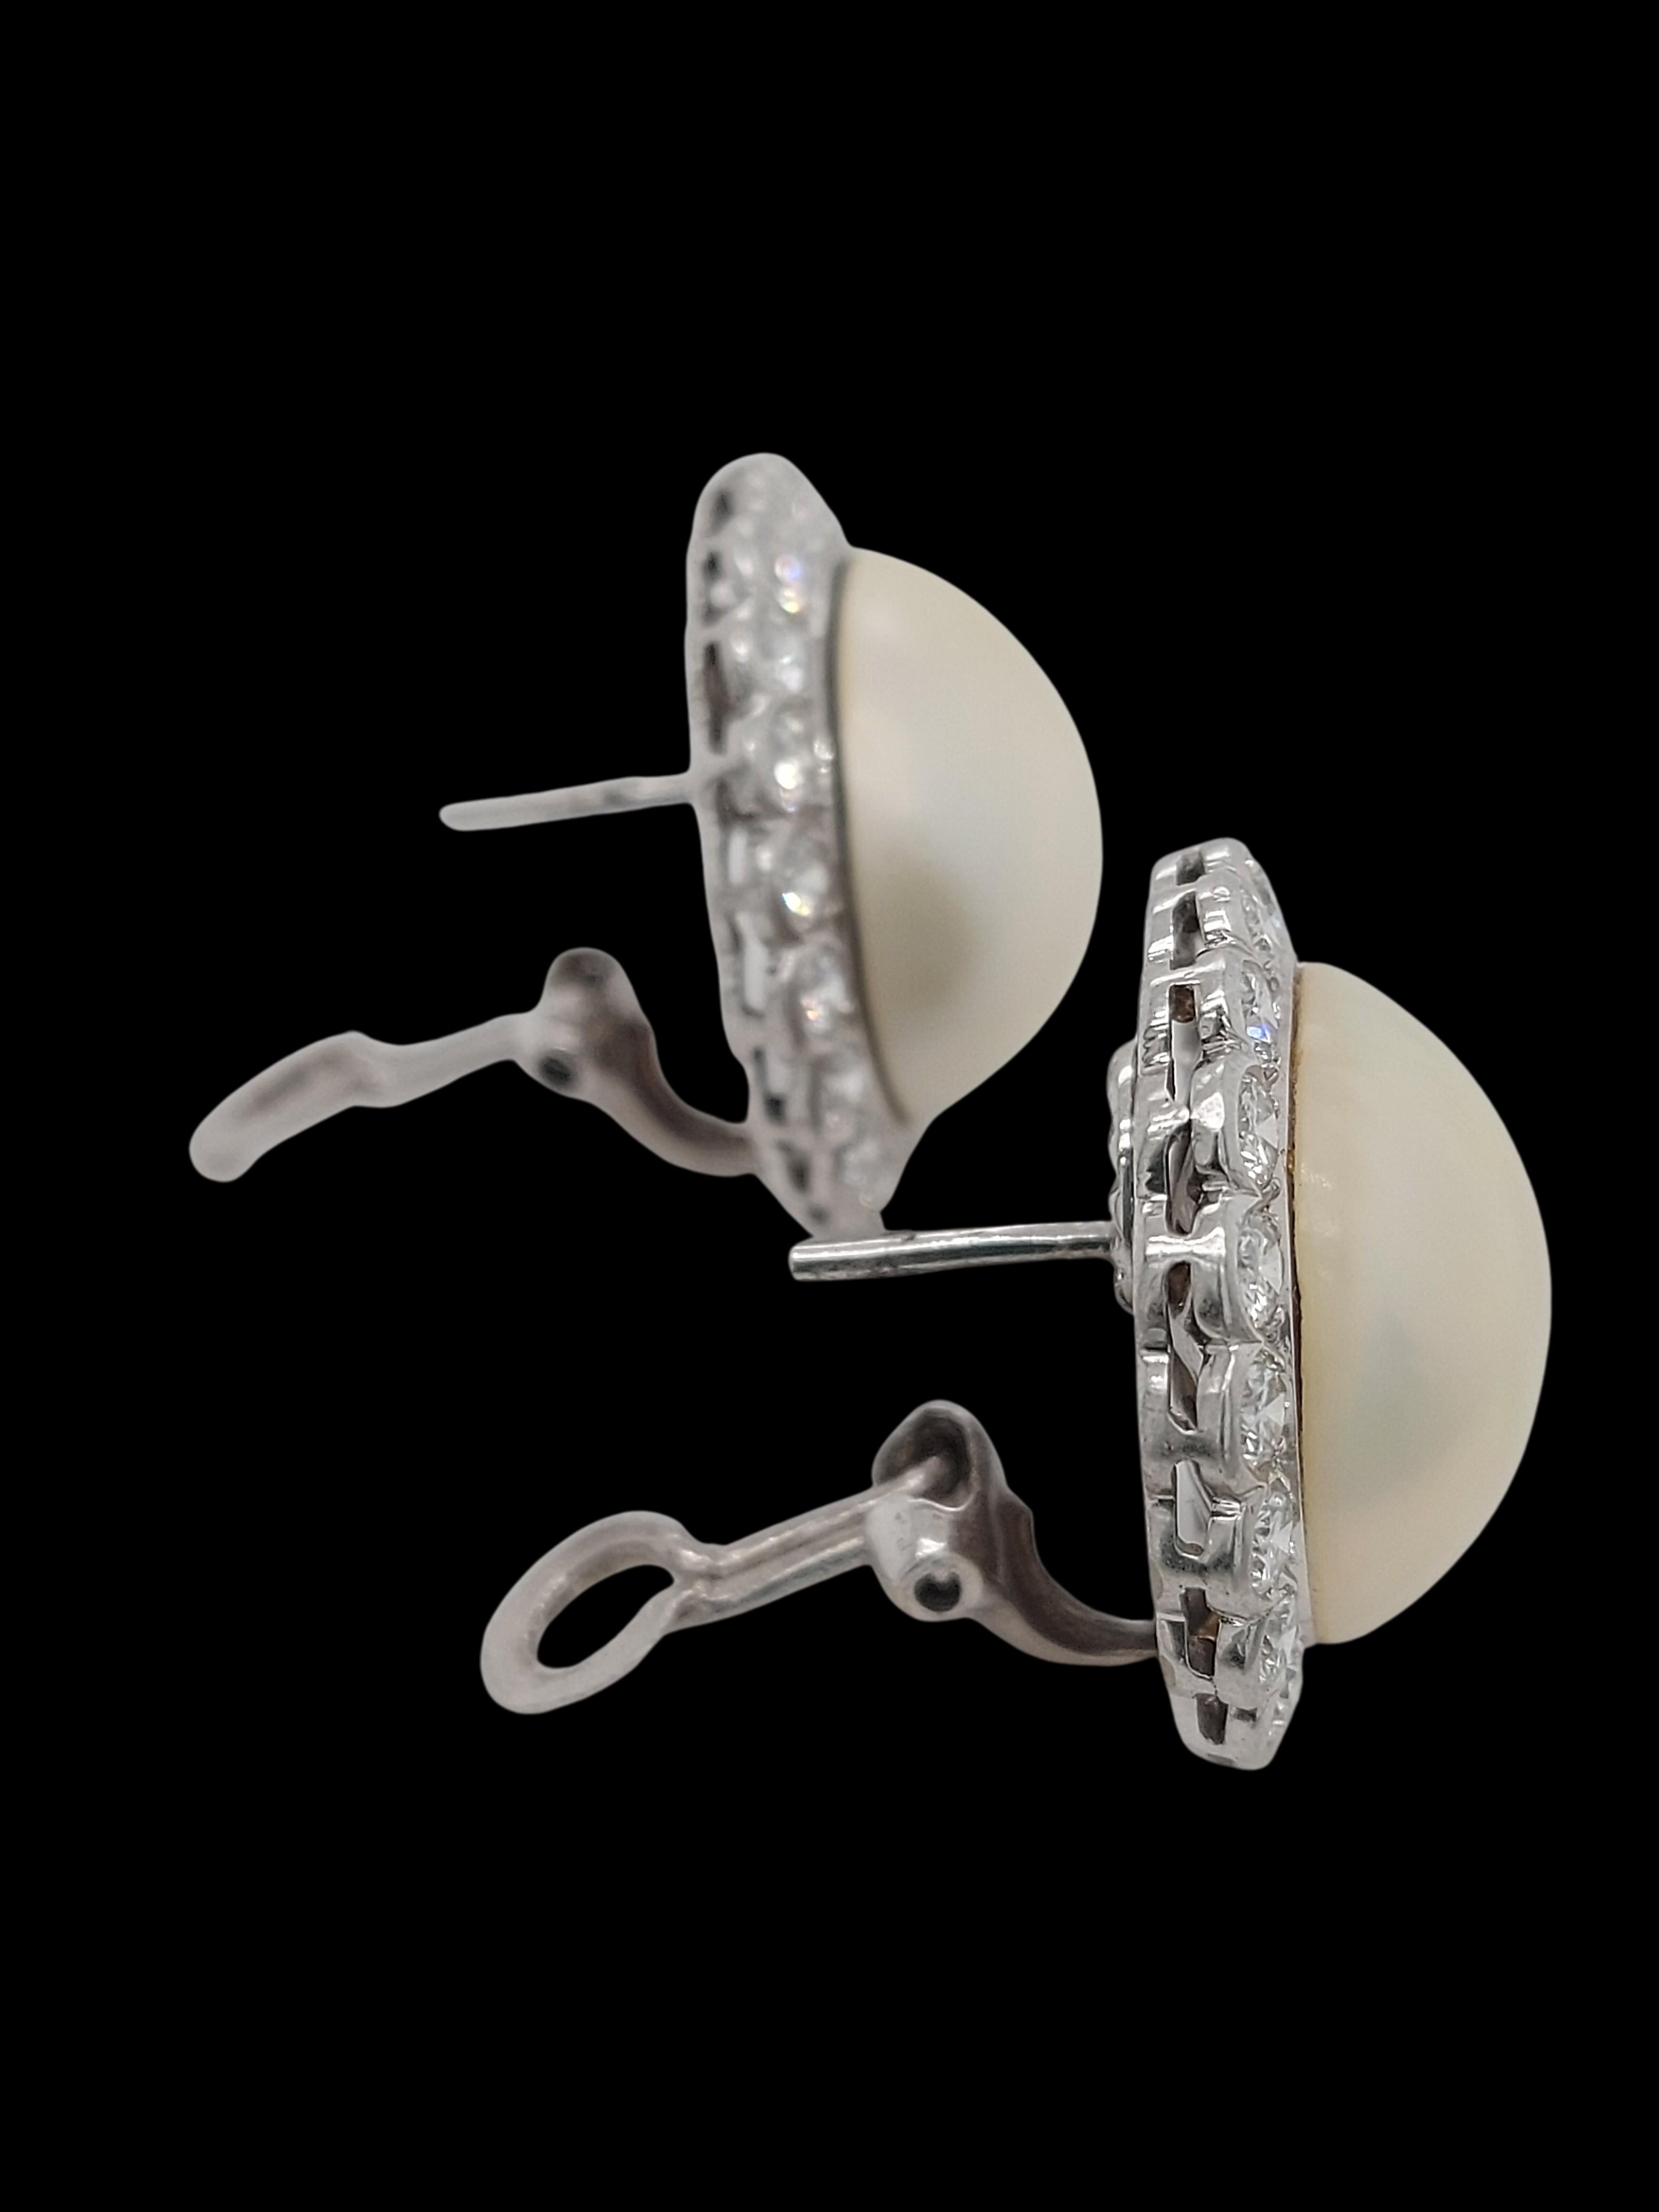 mabe pearl earrings with diamonds